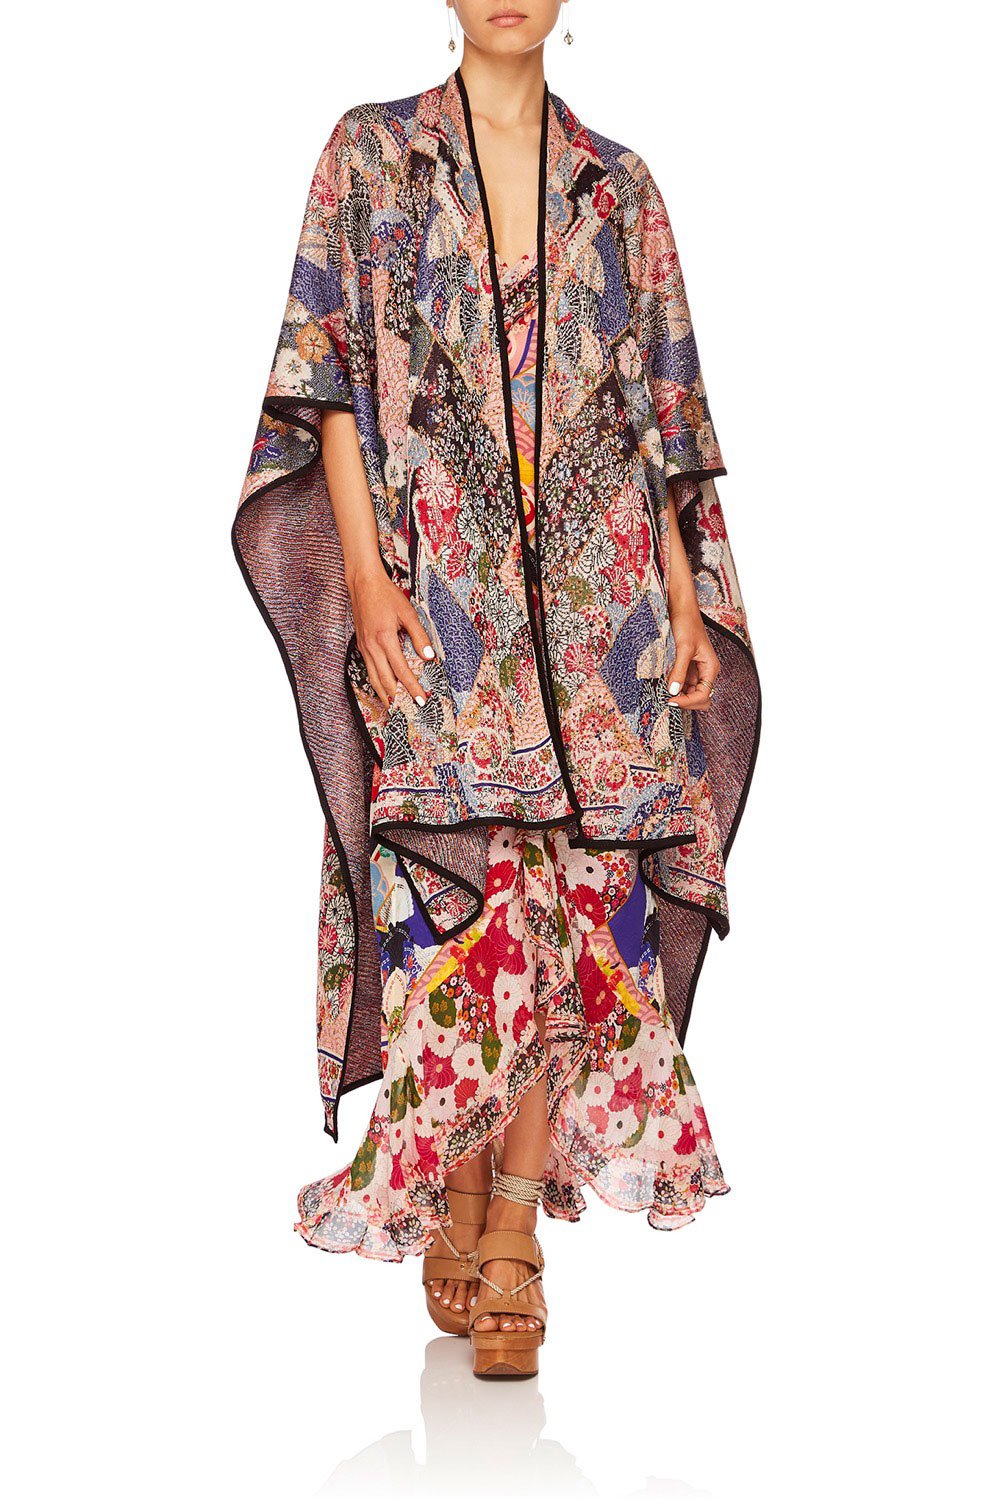 CAMILLA POSTCARDS FROM MARS OVERSIZED THROWOVER PONCHO